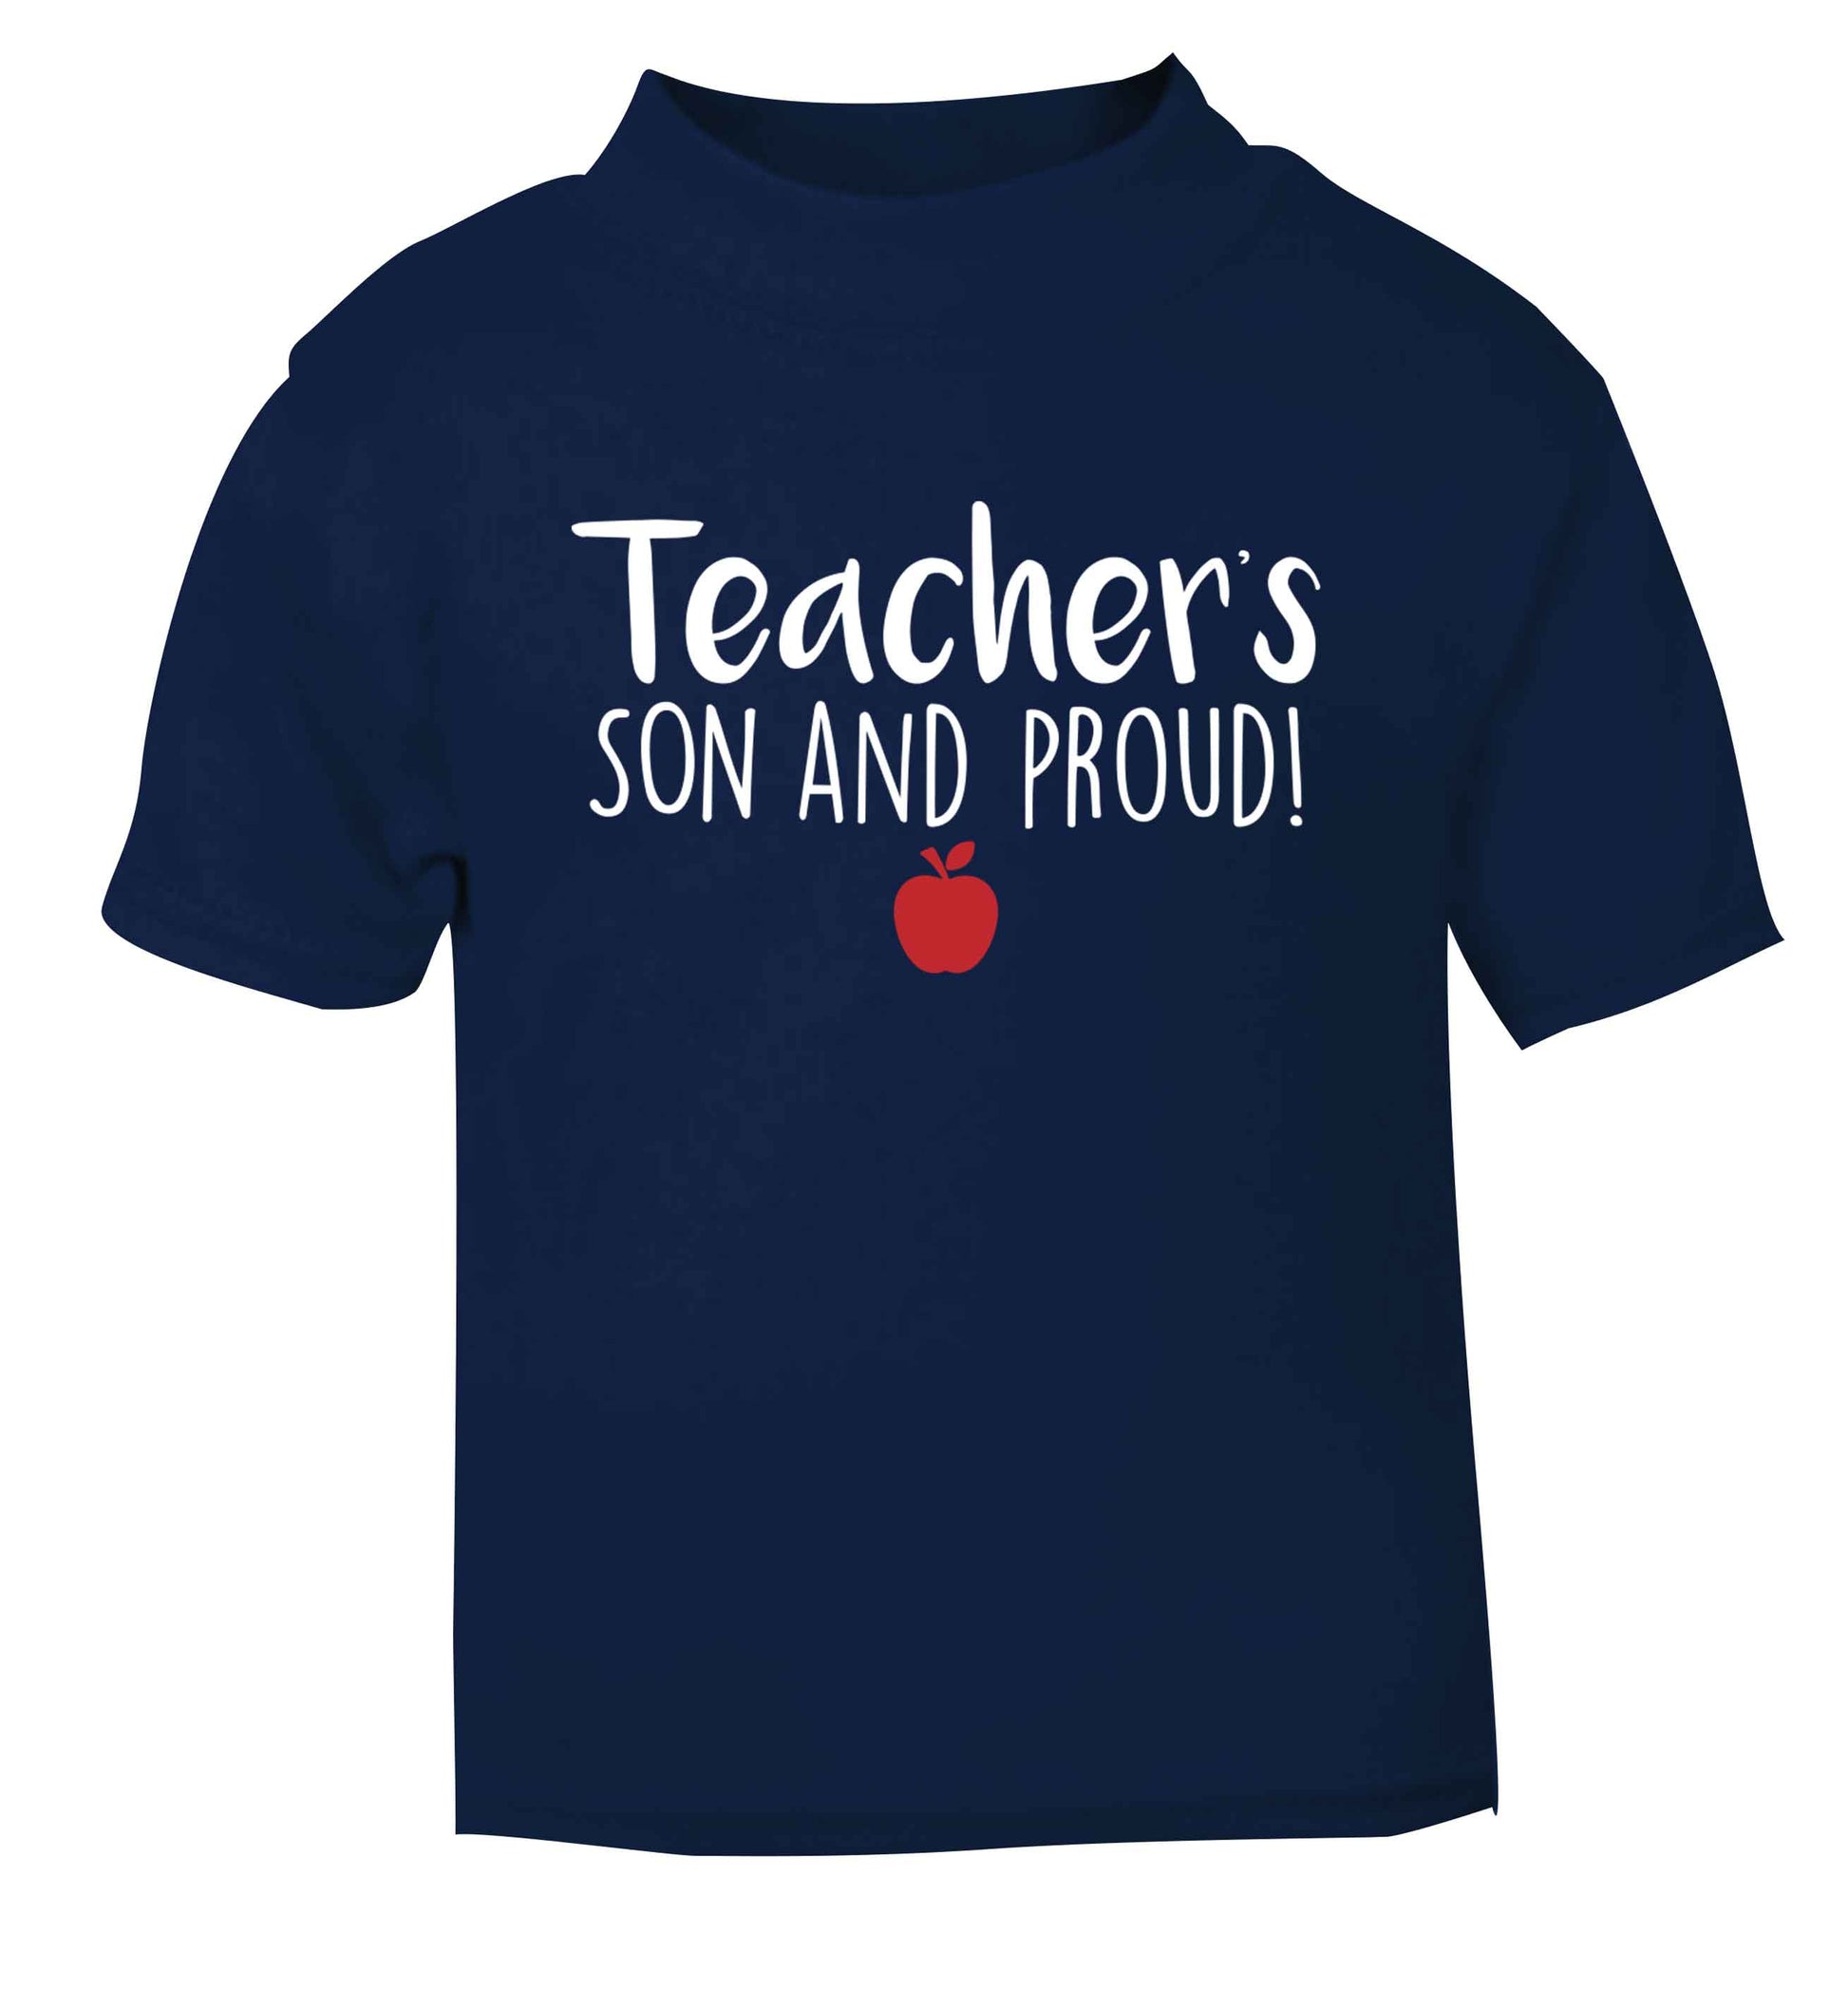 Teachers son and proud navy baby toddler Tshirt 2 Years